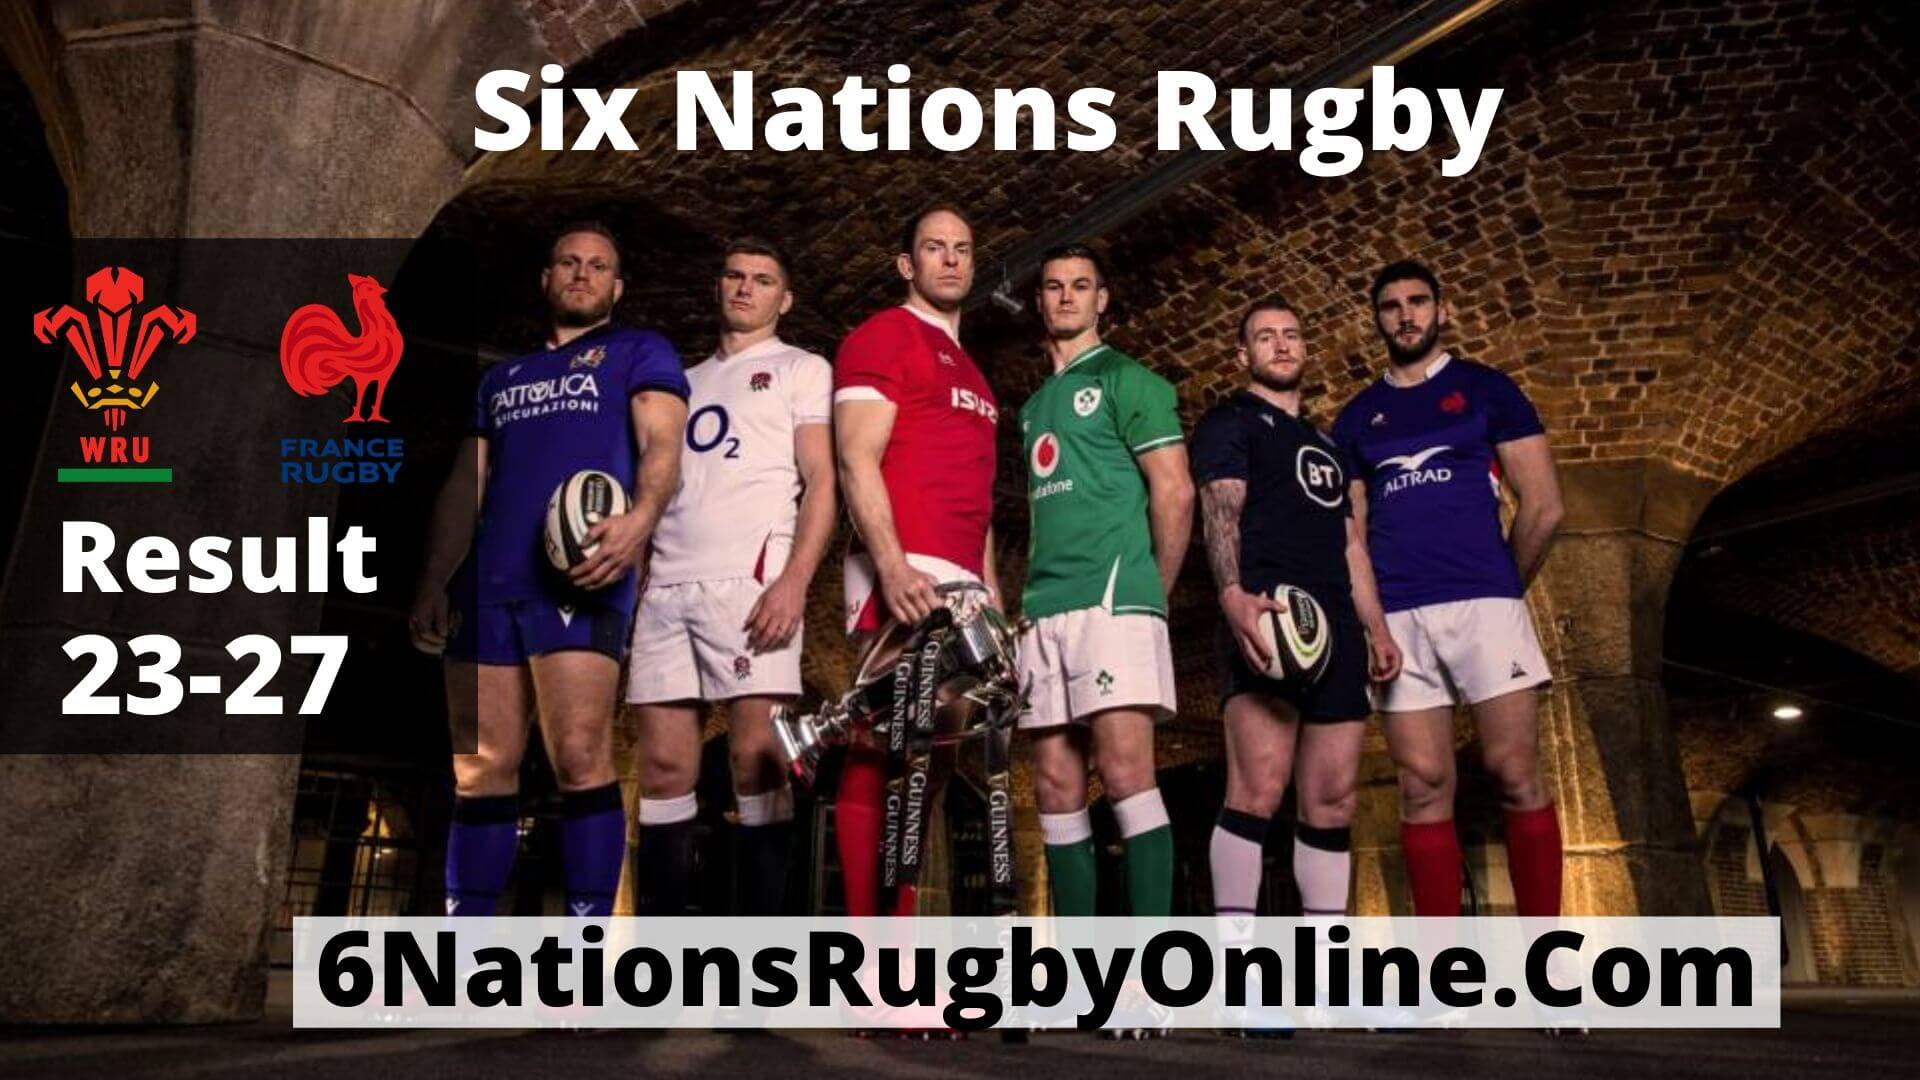 Wales Vs France Result 2020 | Six Nations Rubgby Round 3